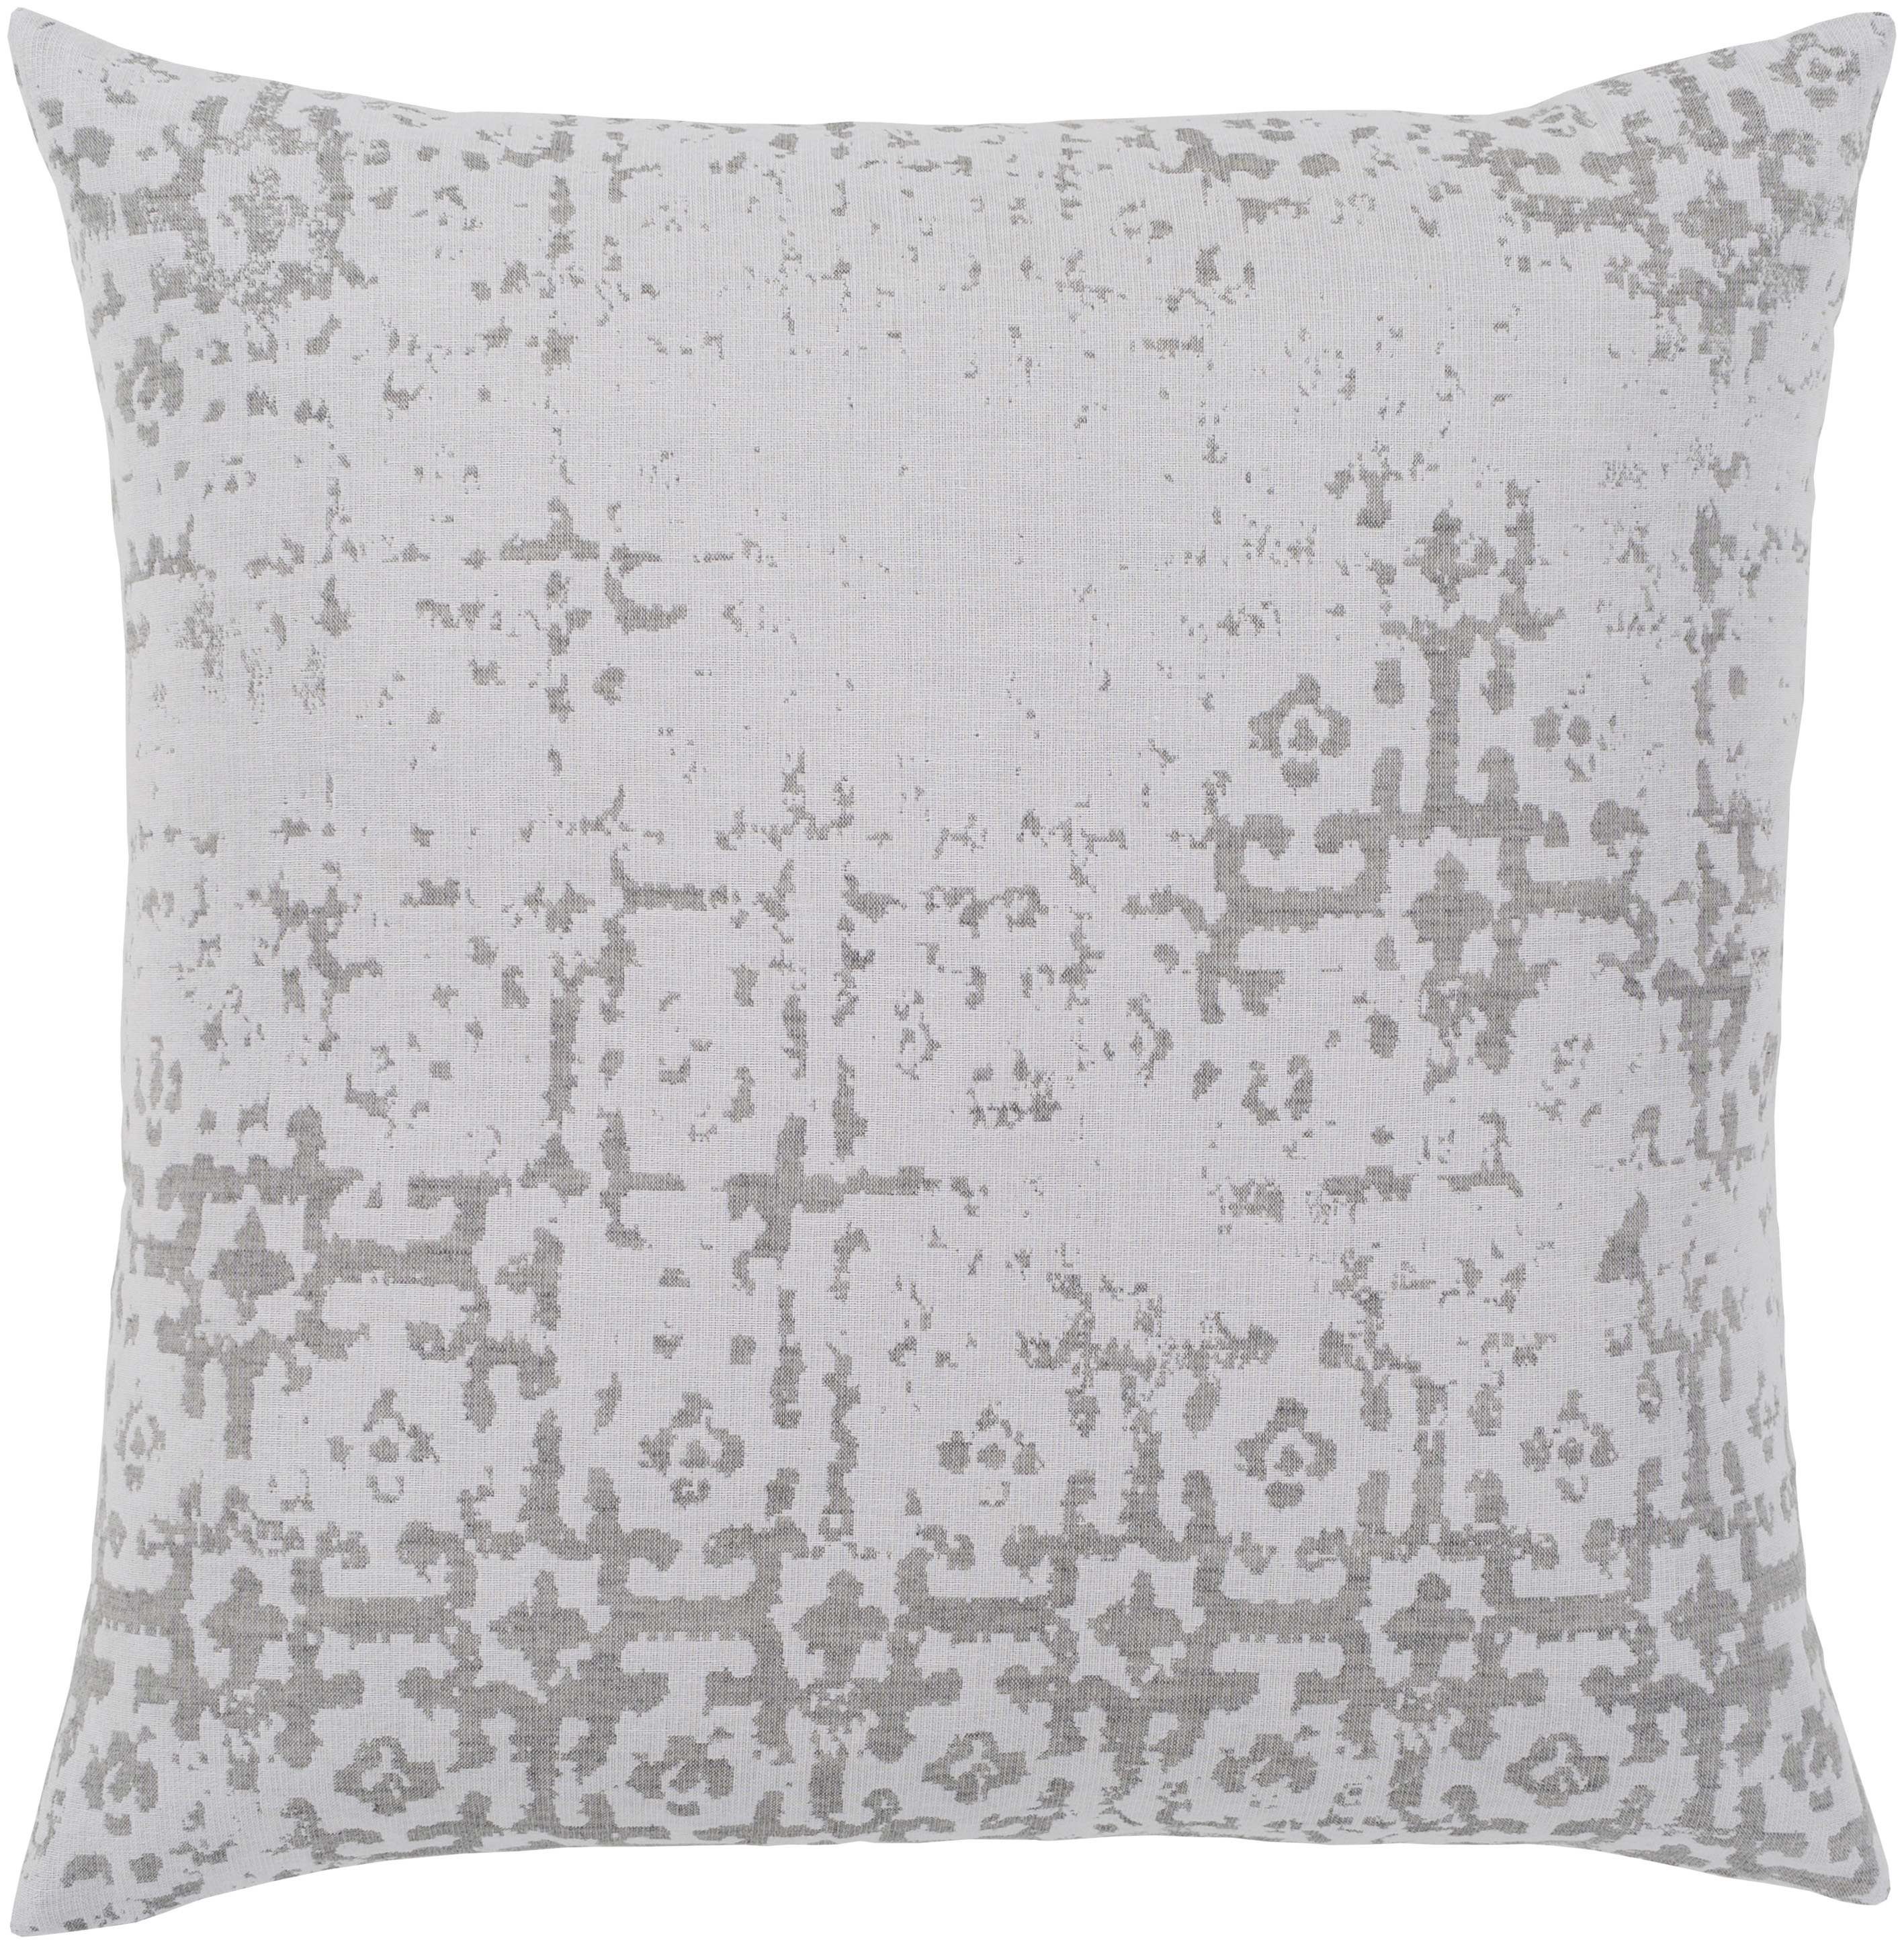 Abstraction Throw Pillow, 20" x 20", with down insert - Image 0